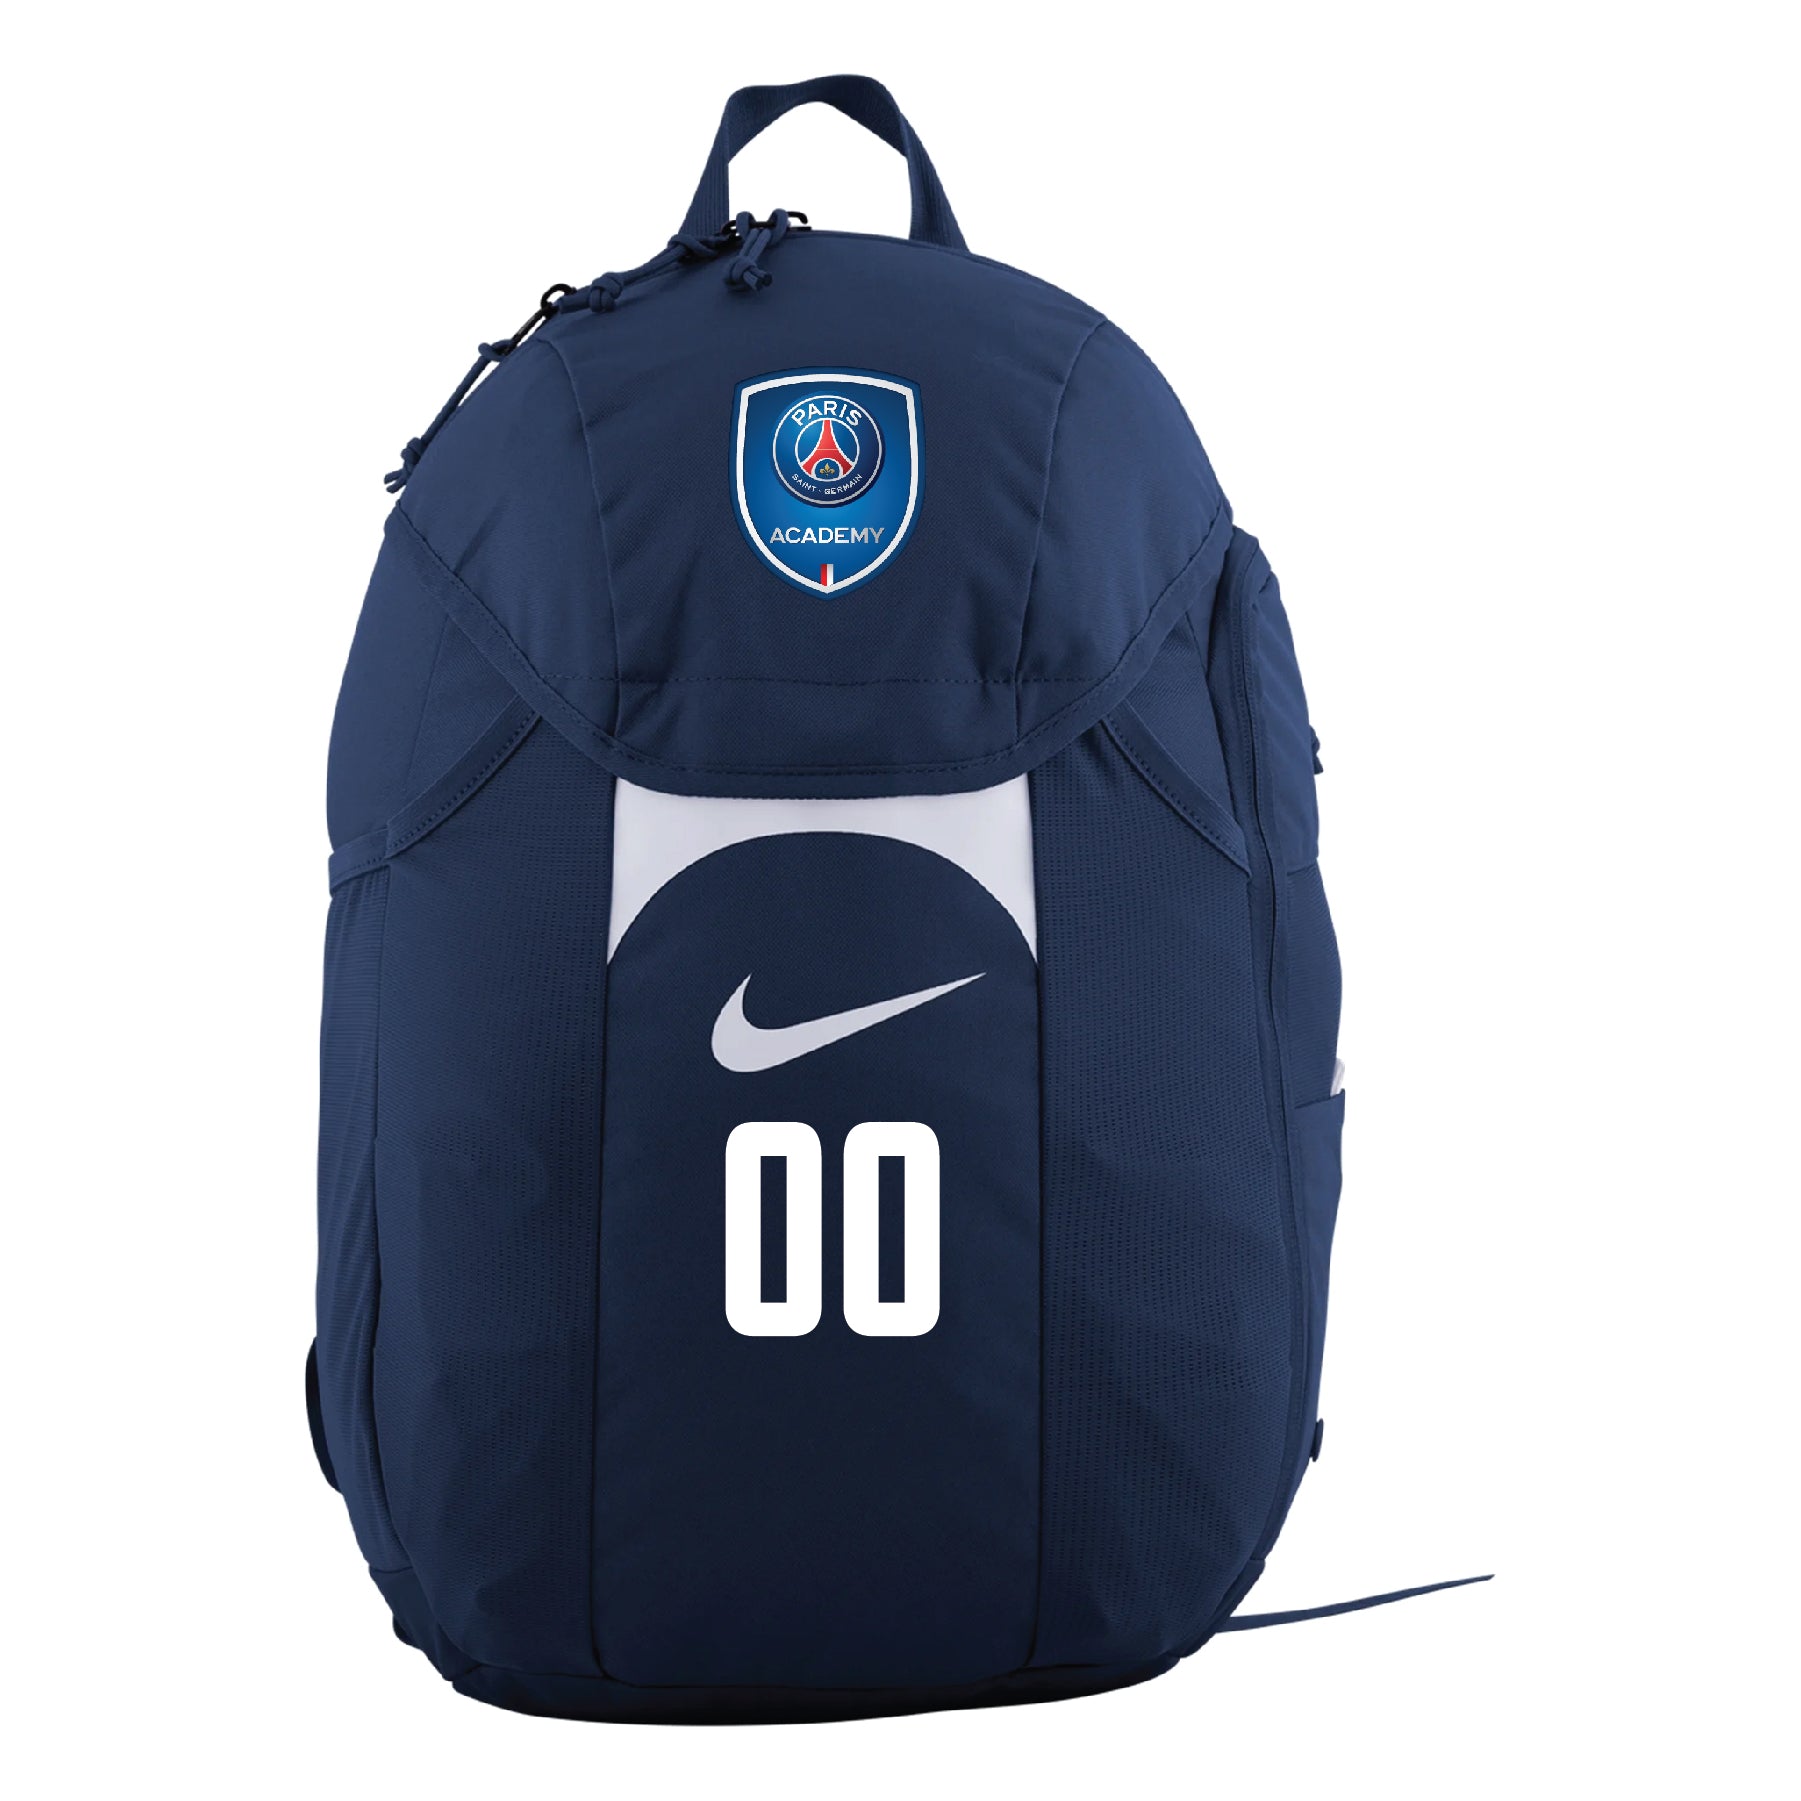 PSG Academy Fort Lauderdale Nike Academy Team Backpack 2.3  Navy